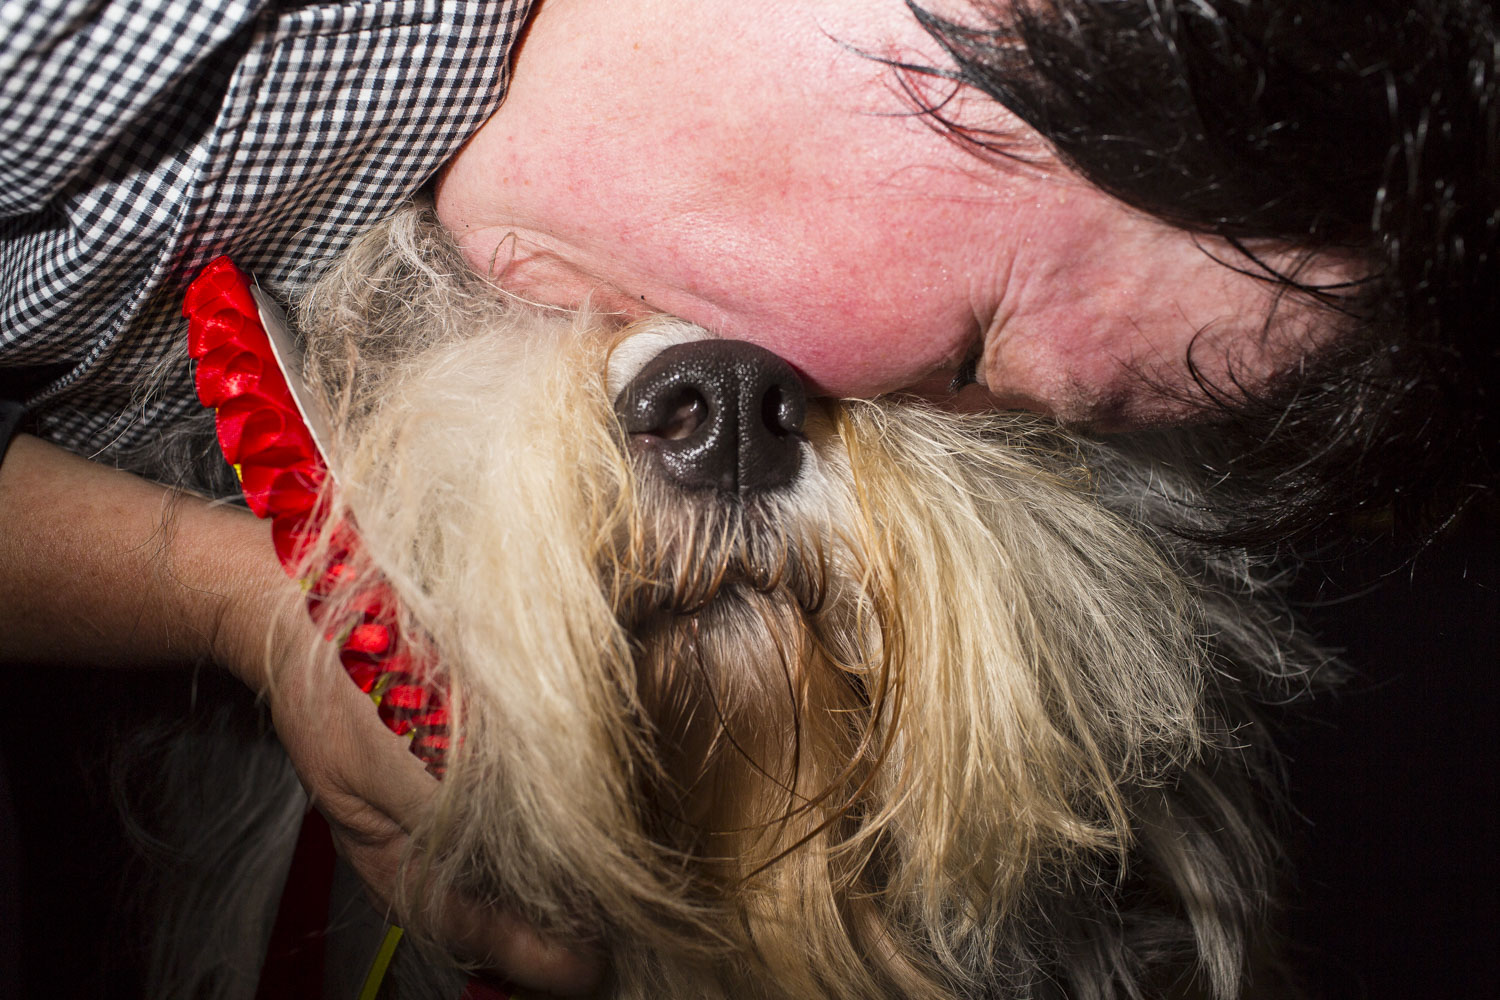 HELSINKI, FINLAND - AUG 10: Nancy, a 3 year old female Old English Sheepdog is smothered with a kiss by her handler Elisabeth Antl, top, from Austria, after winning Best of Breed during the 2014 World Dog Show on Sunday, August 10th, 2014, in Helsinki, Finland.  (Photo by Landon Nordeman)